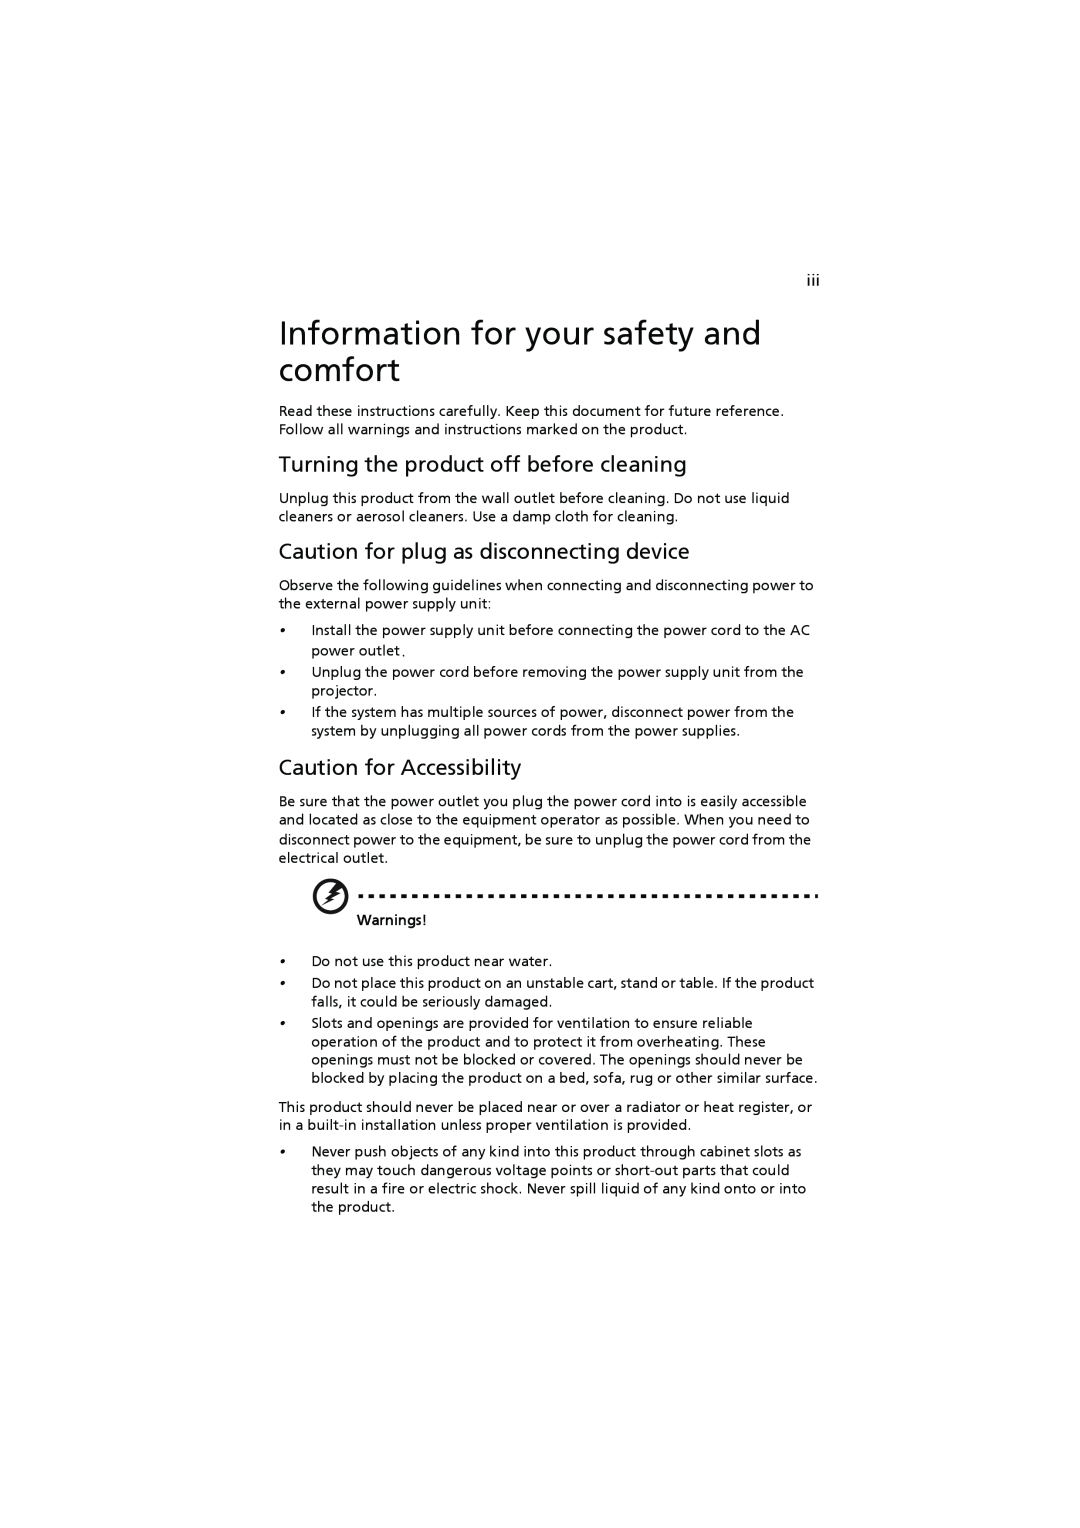 Acer P5271i Information for your safety and comfort, Turning the product off before cleaning, Caution for Accessibility 